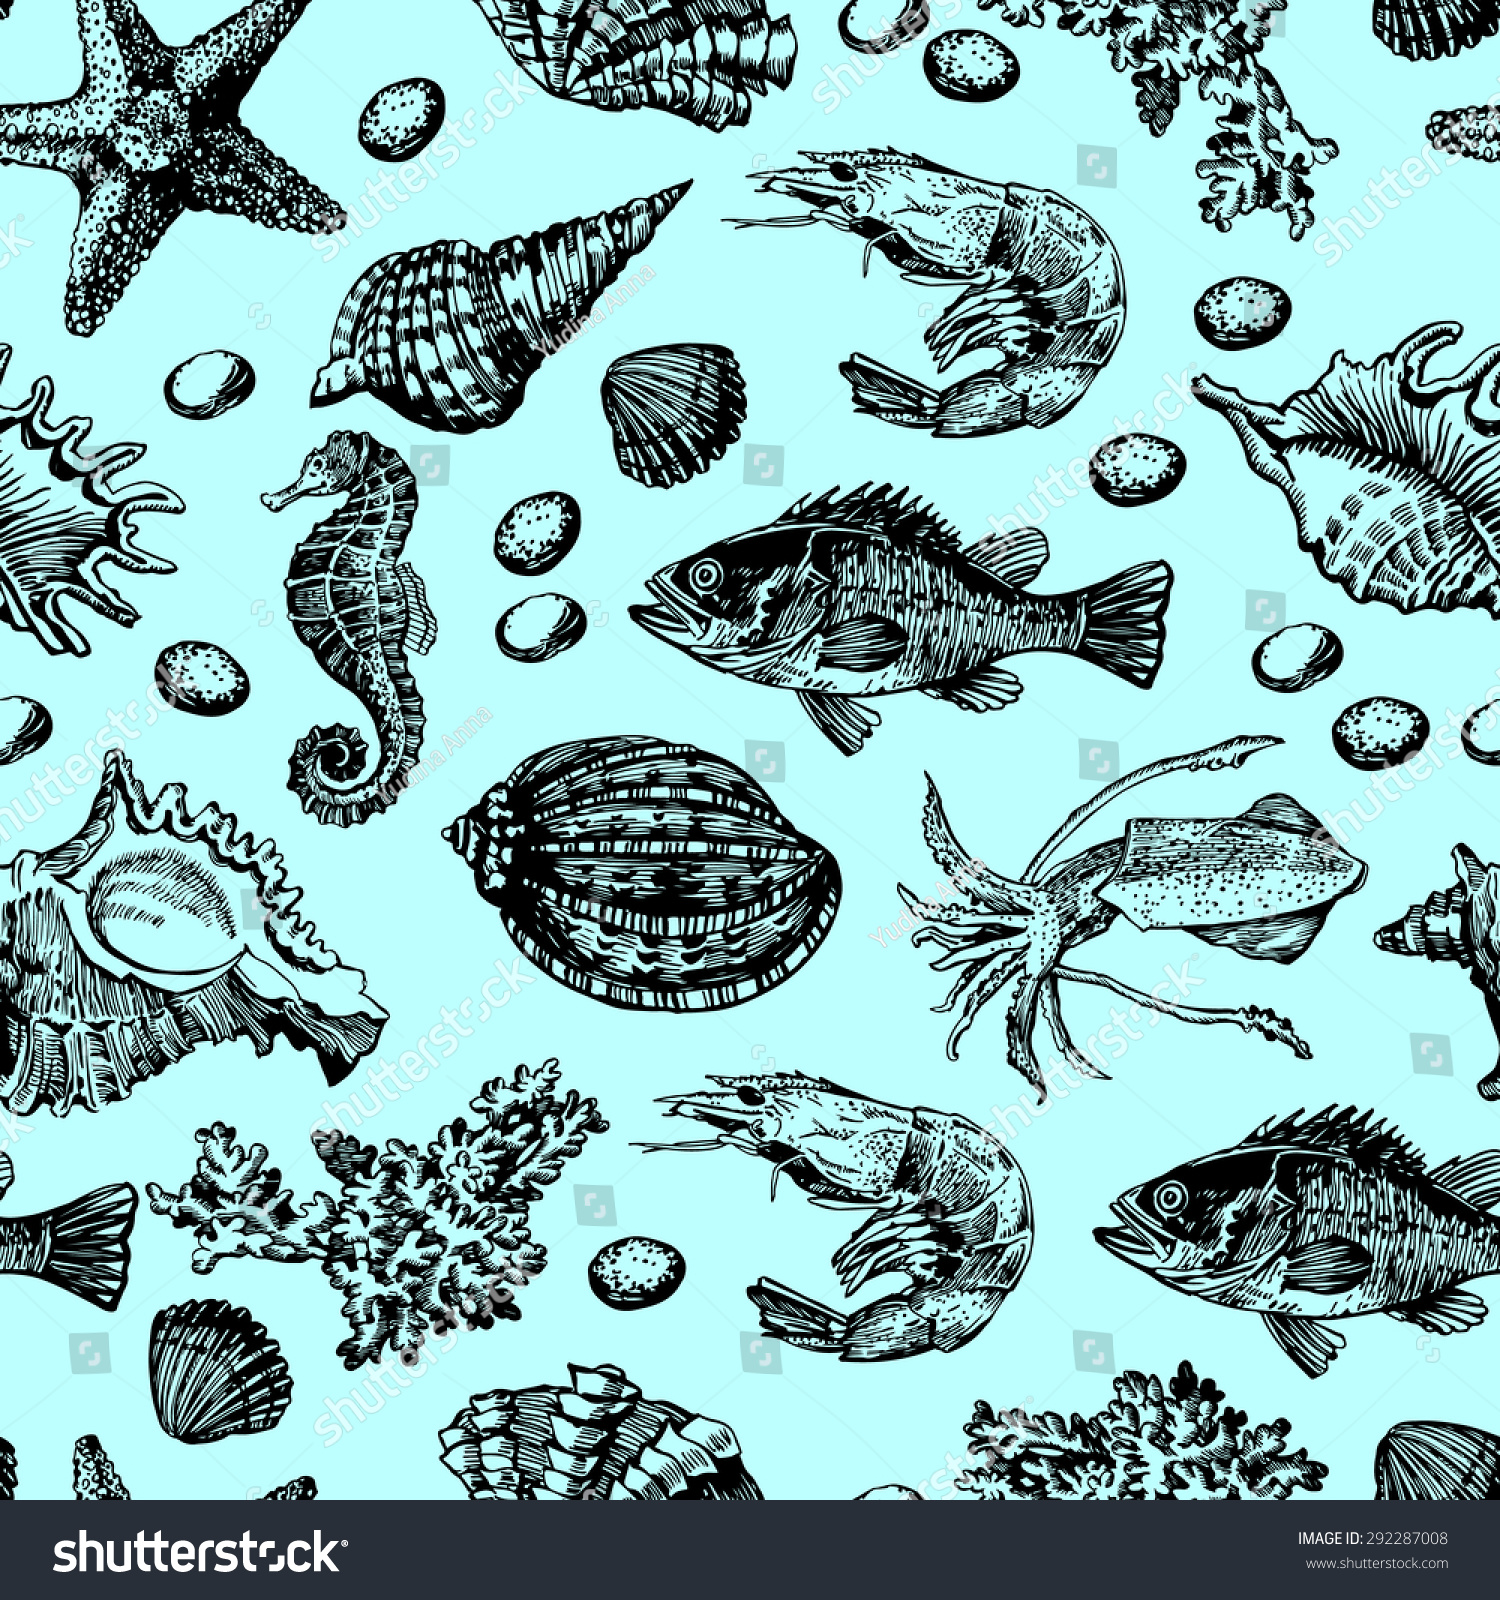 Graphic drawings of various inhabitants of the underwater world Seamless for fabric design t wrapping paper and printing and web projects Stock